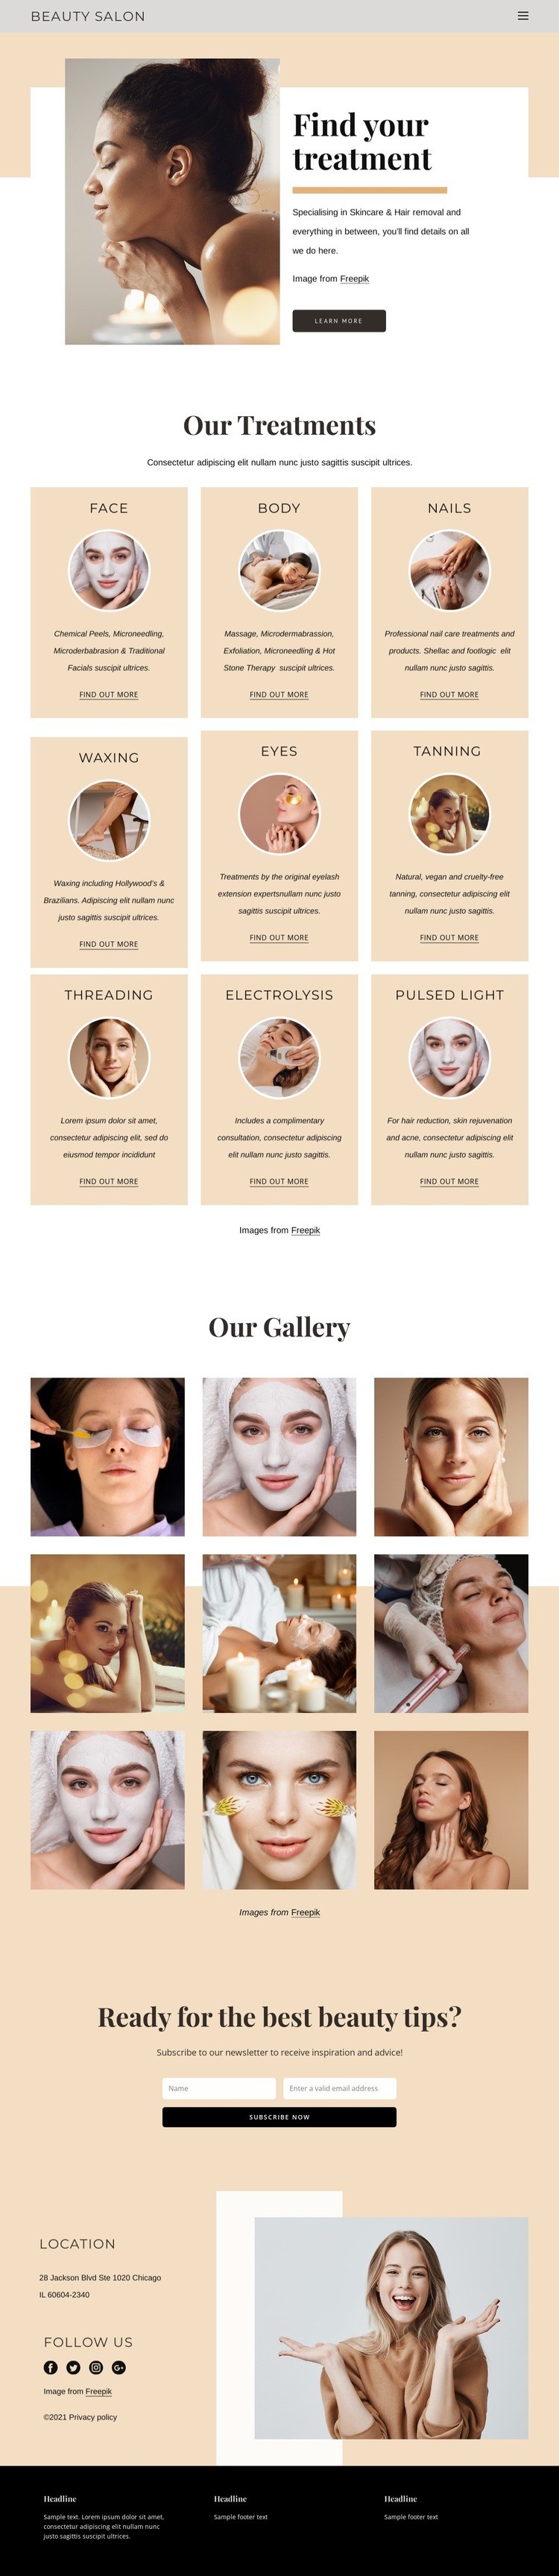 Professional beauty treatments Homepage Design